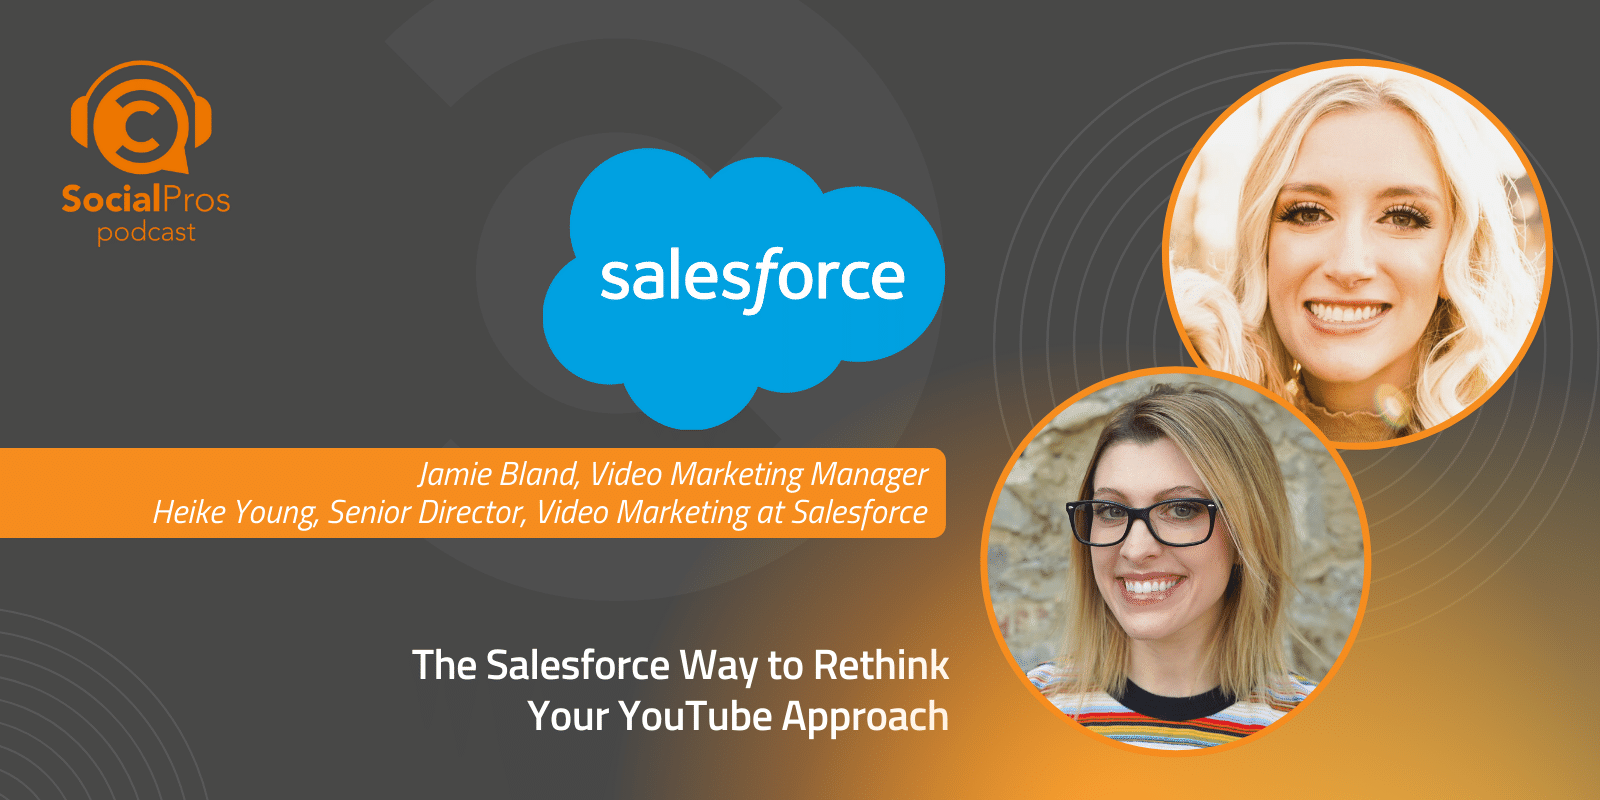 The Salesforce Way to Rethink Your YouTube Approach